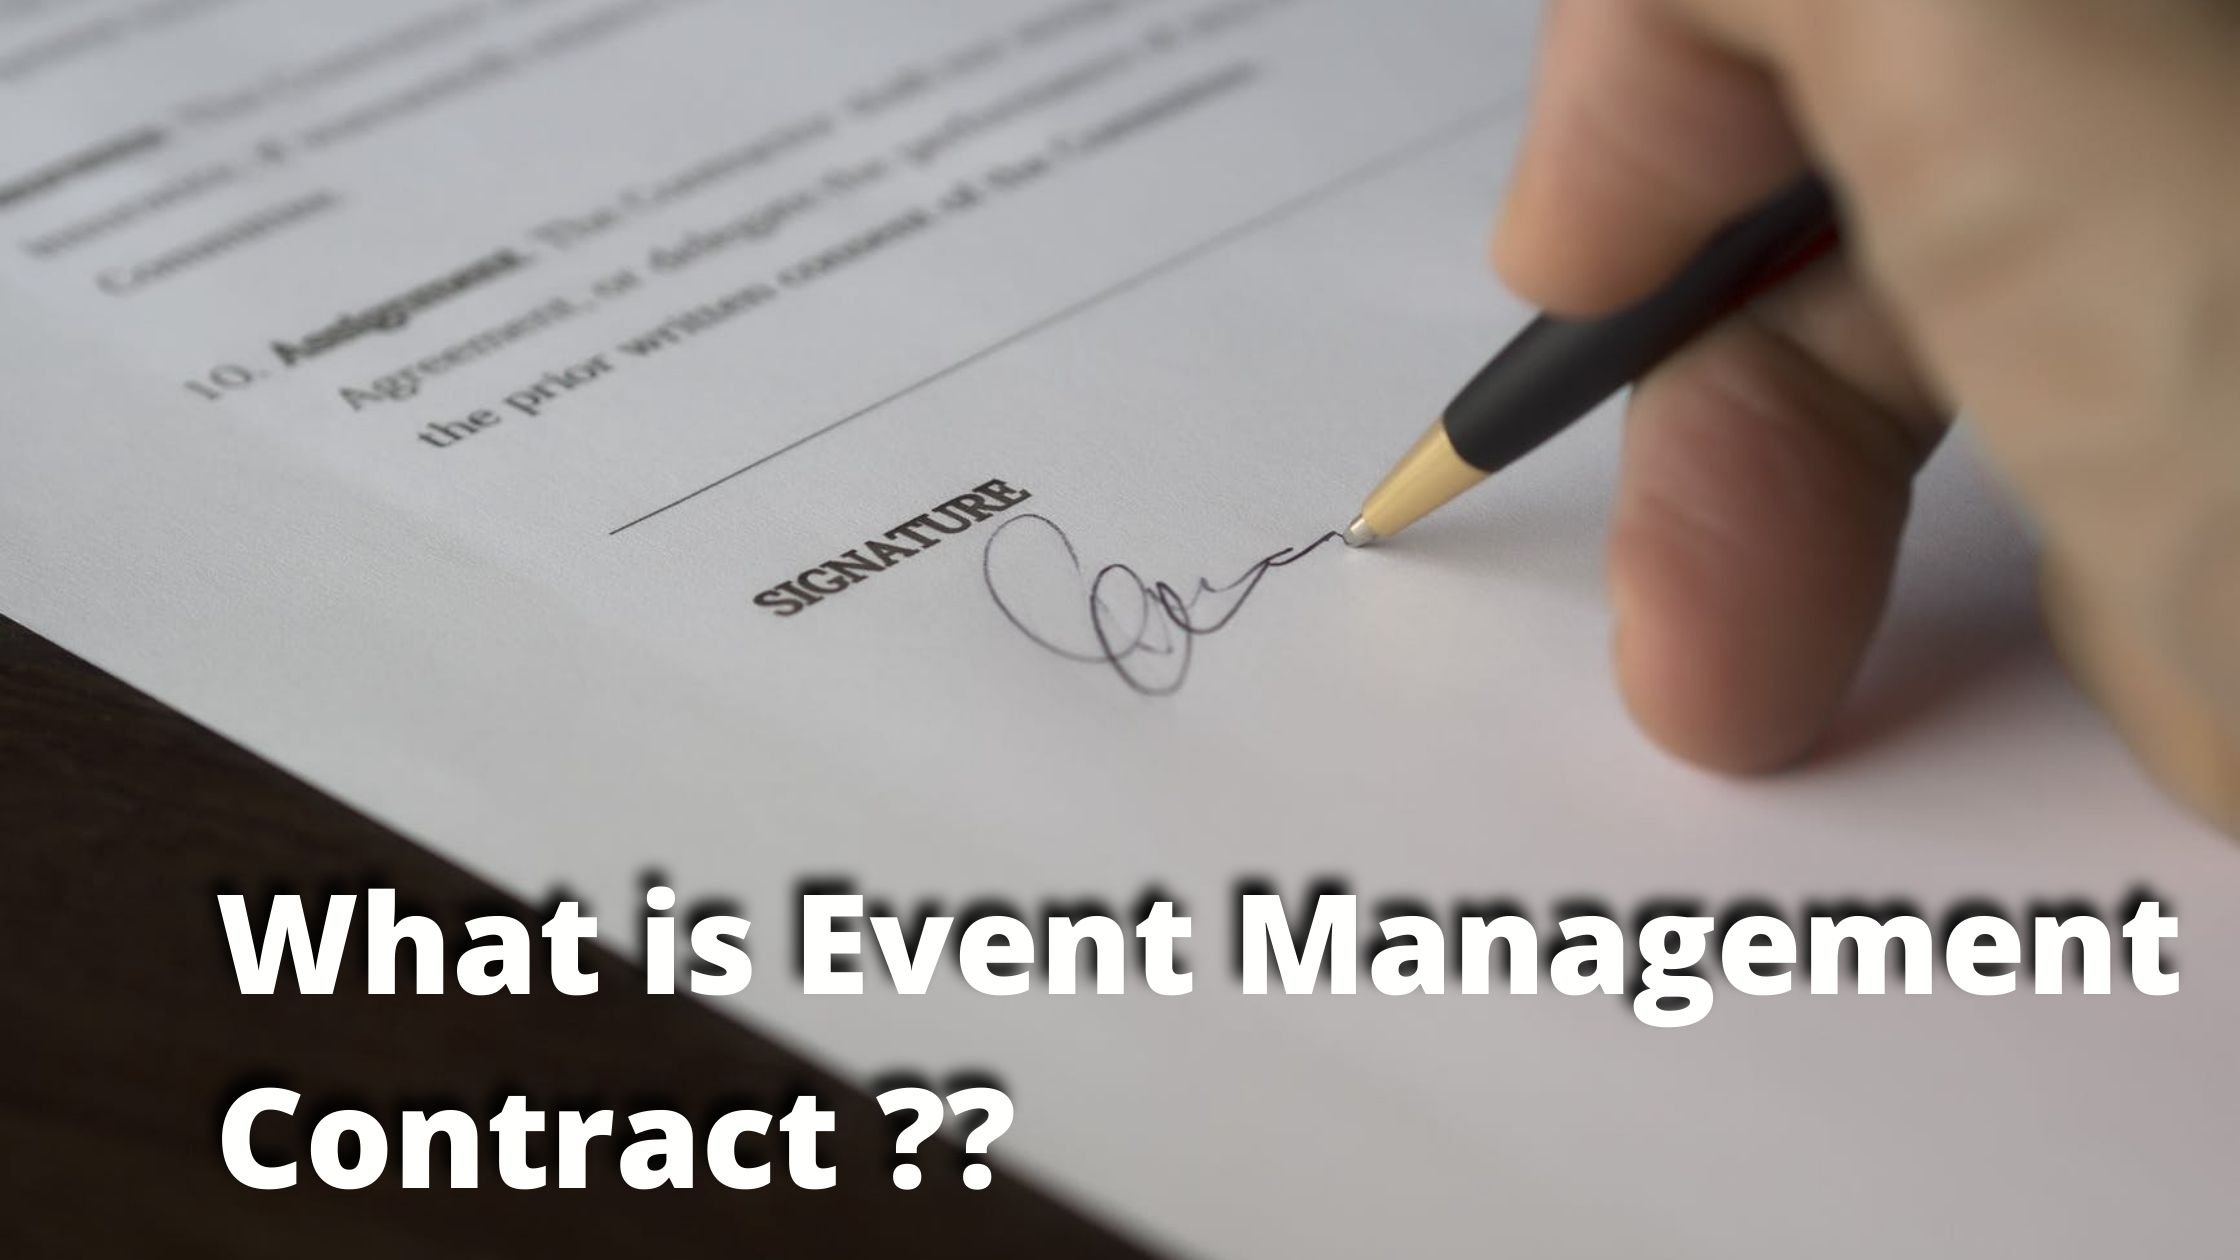 What is an Event Management Contract